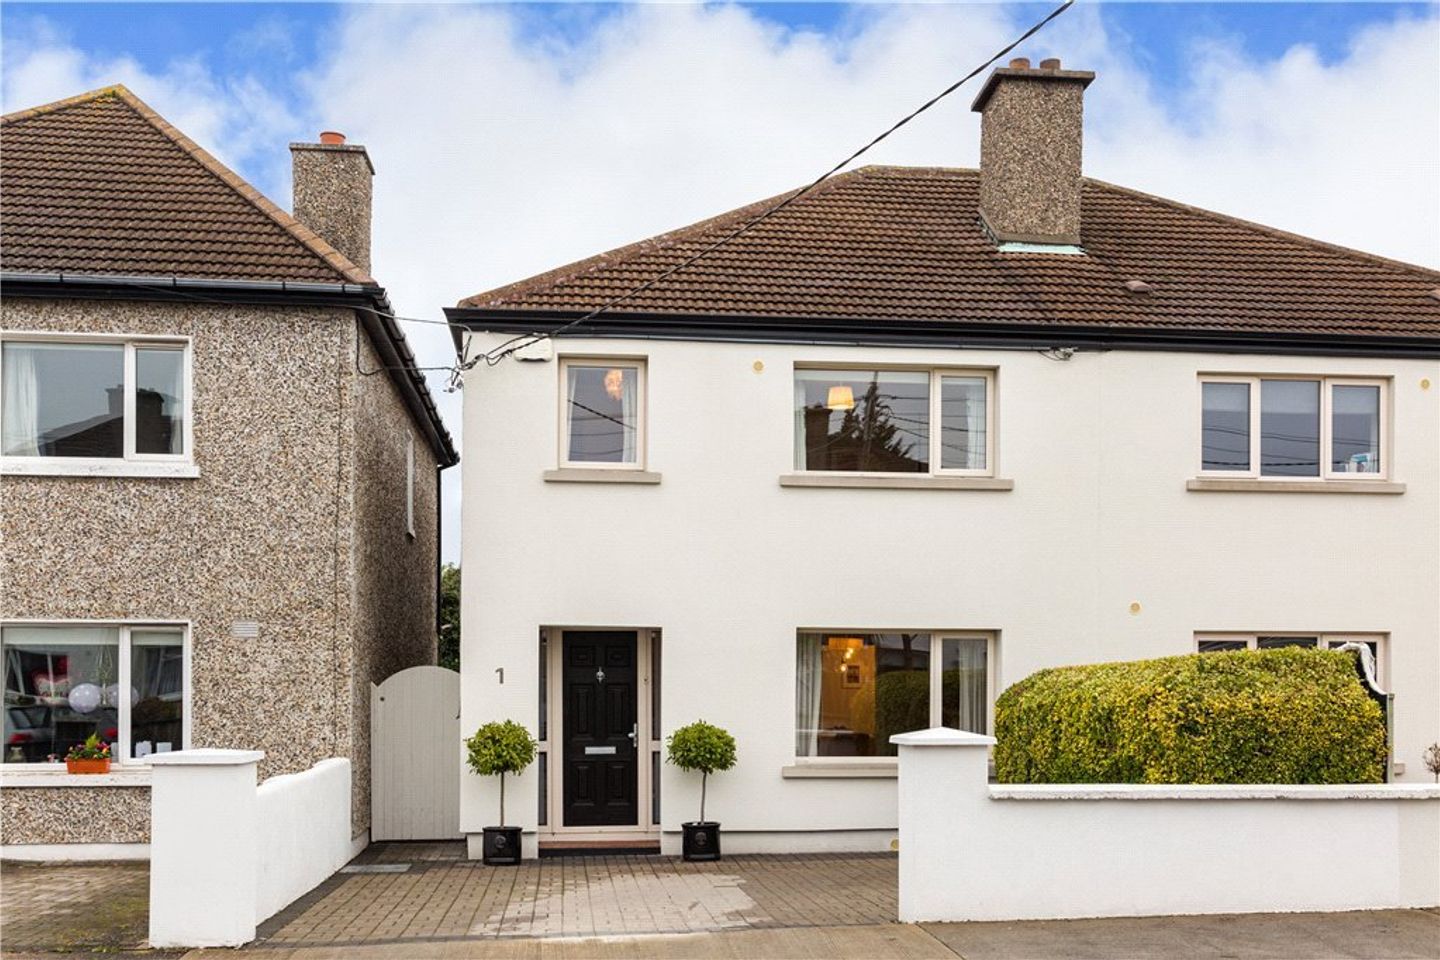 1 Trimleston Road Booterstown, Booterstown, Co. Dublin, A94YF79